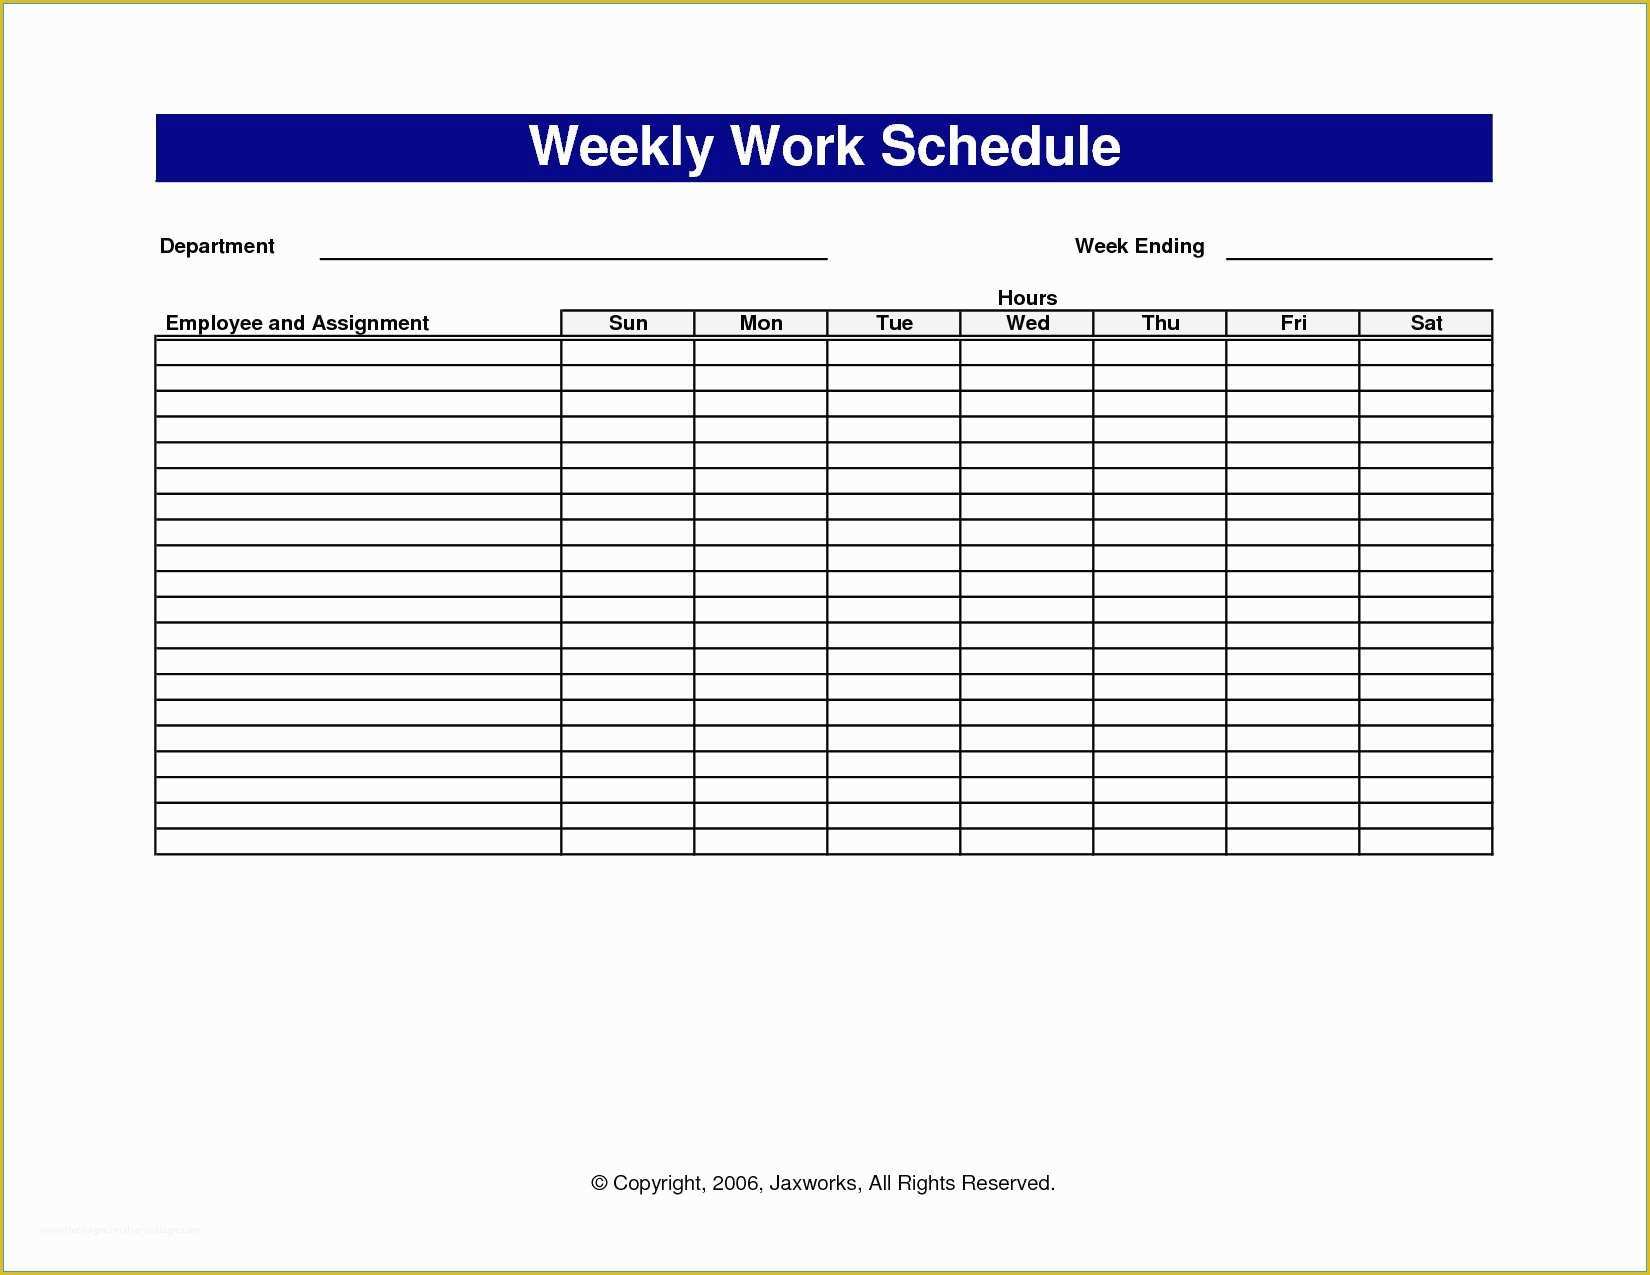 Free Work Schedule Maker Template Of Awesome S Free Work Schedule Maker Template